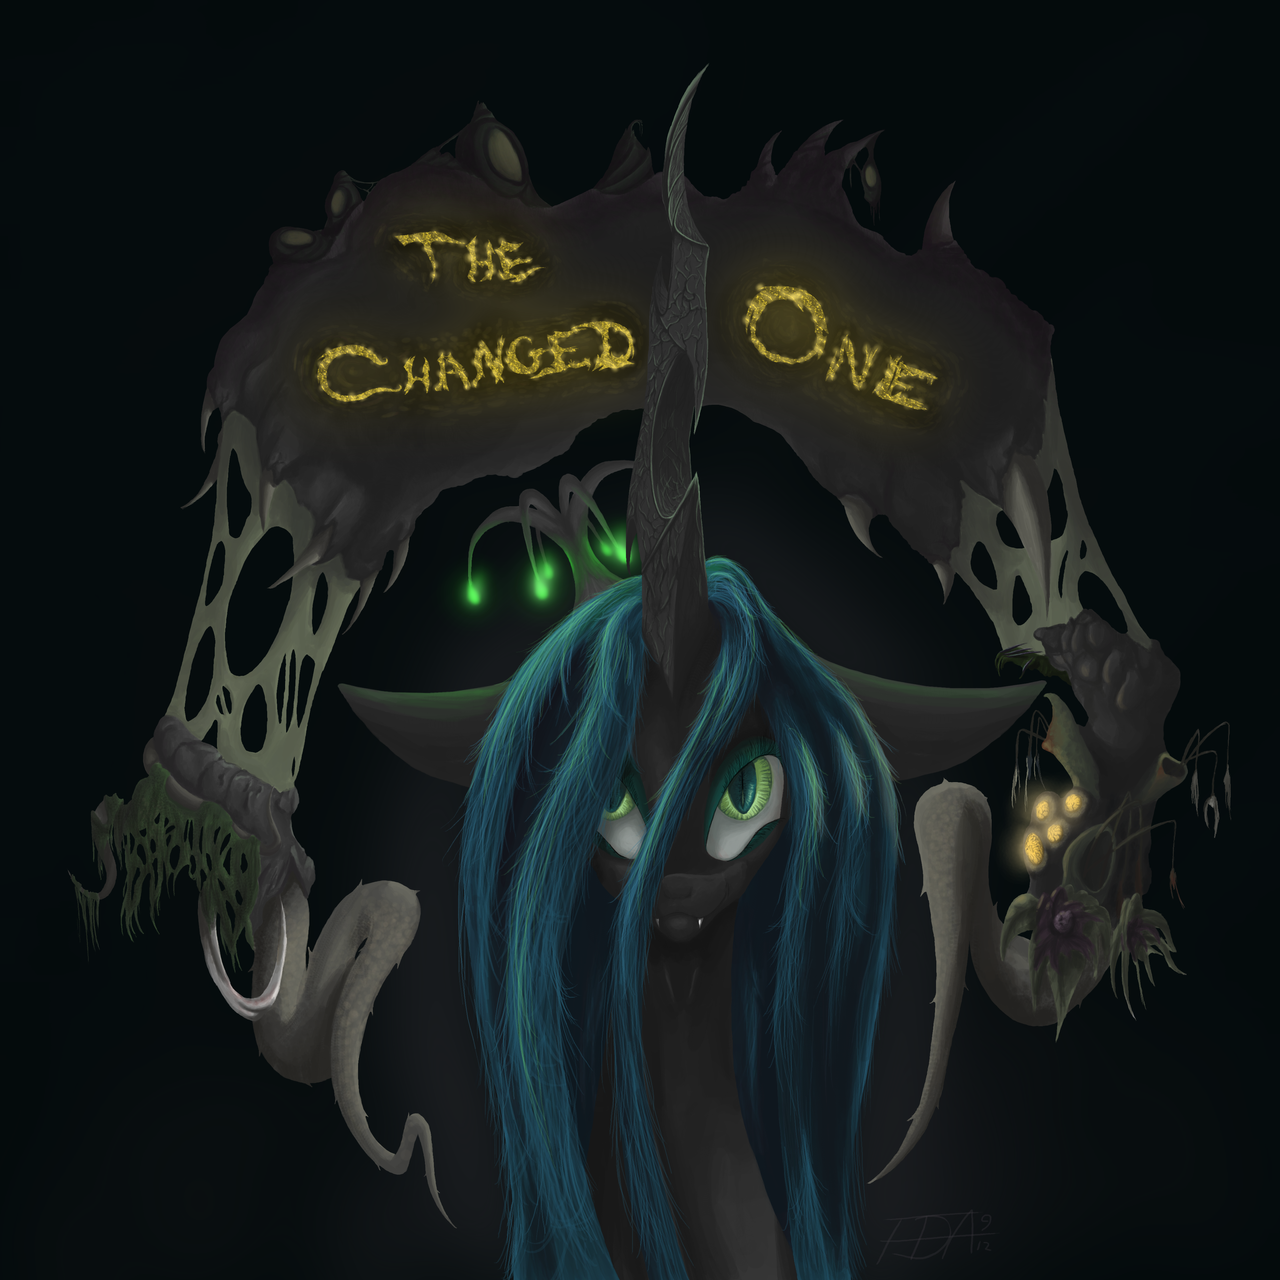 http://img07.deviantart.net/bc36/i/2012/258/9/6/the_changed_one_by_feral_dragon_art-d5etdqj.png